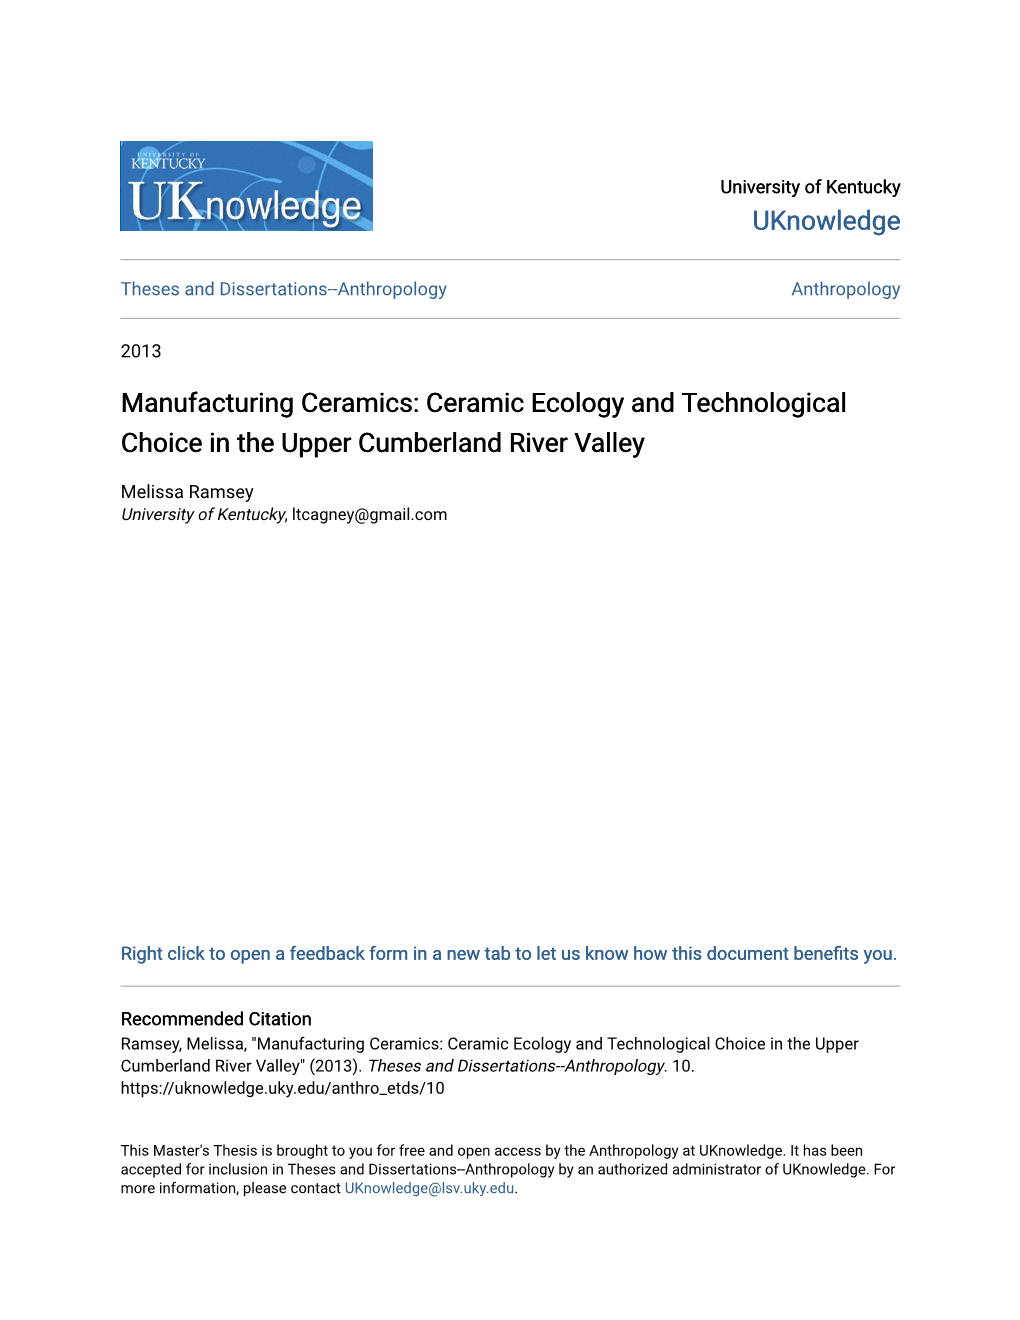 Manufacturing Ceramics: Ceramic Ecology and Technological Choice in the Upper Cumberland River Valley